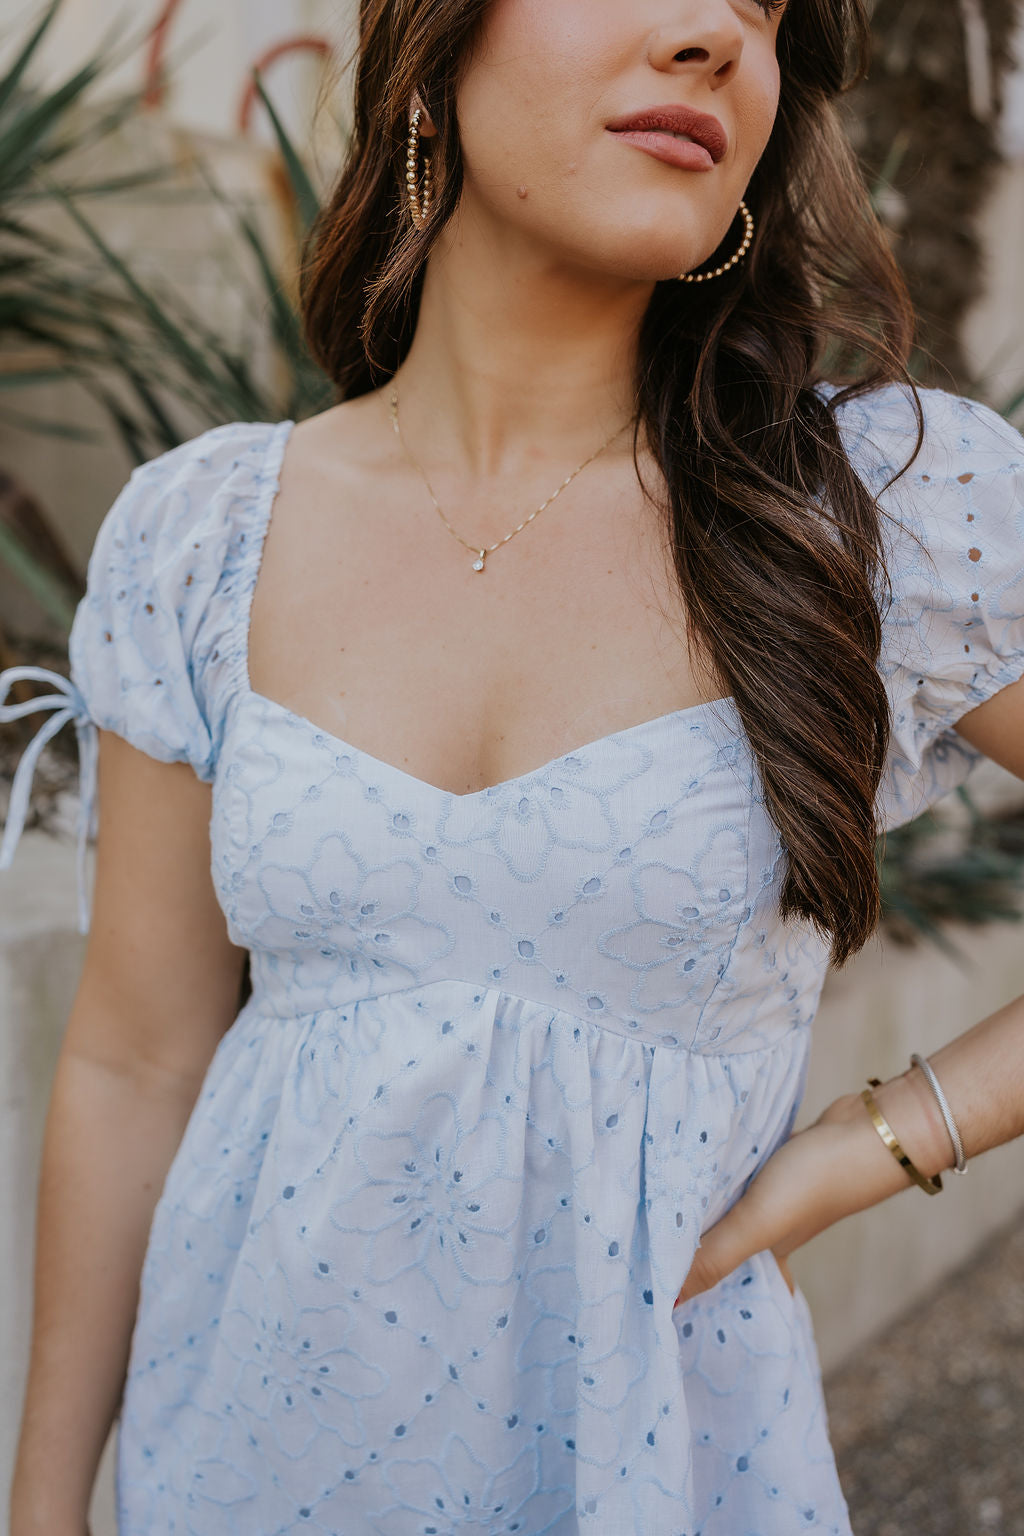 Close up view of female model wearing the The Ella Light Blue Eyelet Mini Dress which features light blue cotton fabric with an eyelet floral pattern, mini length, light blue lining, a sweetheart neckline, short puff sleeves with tie details, and a smocked back.